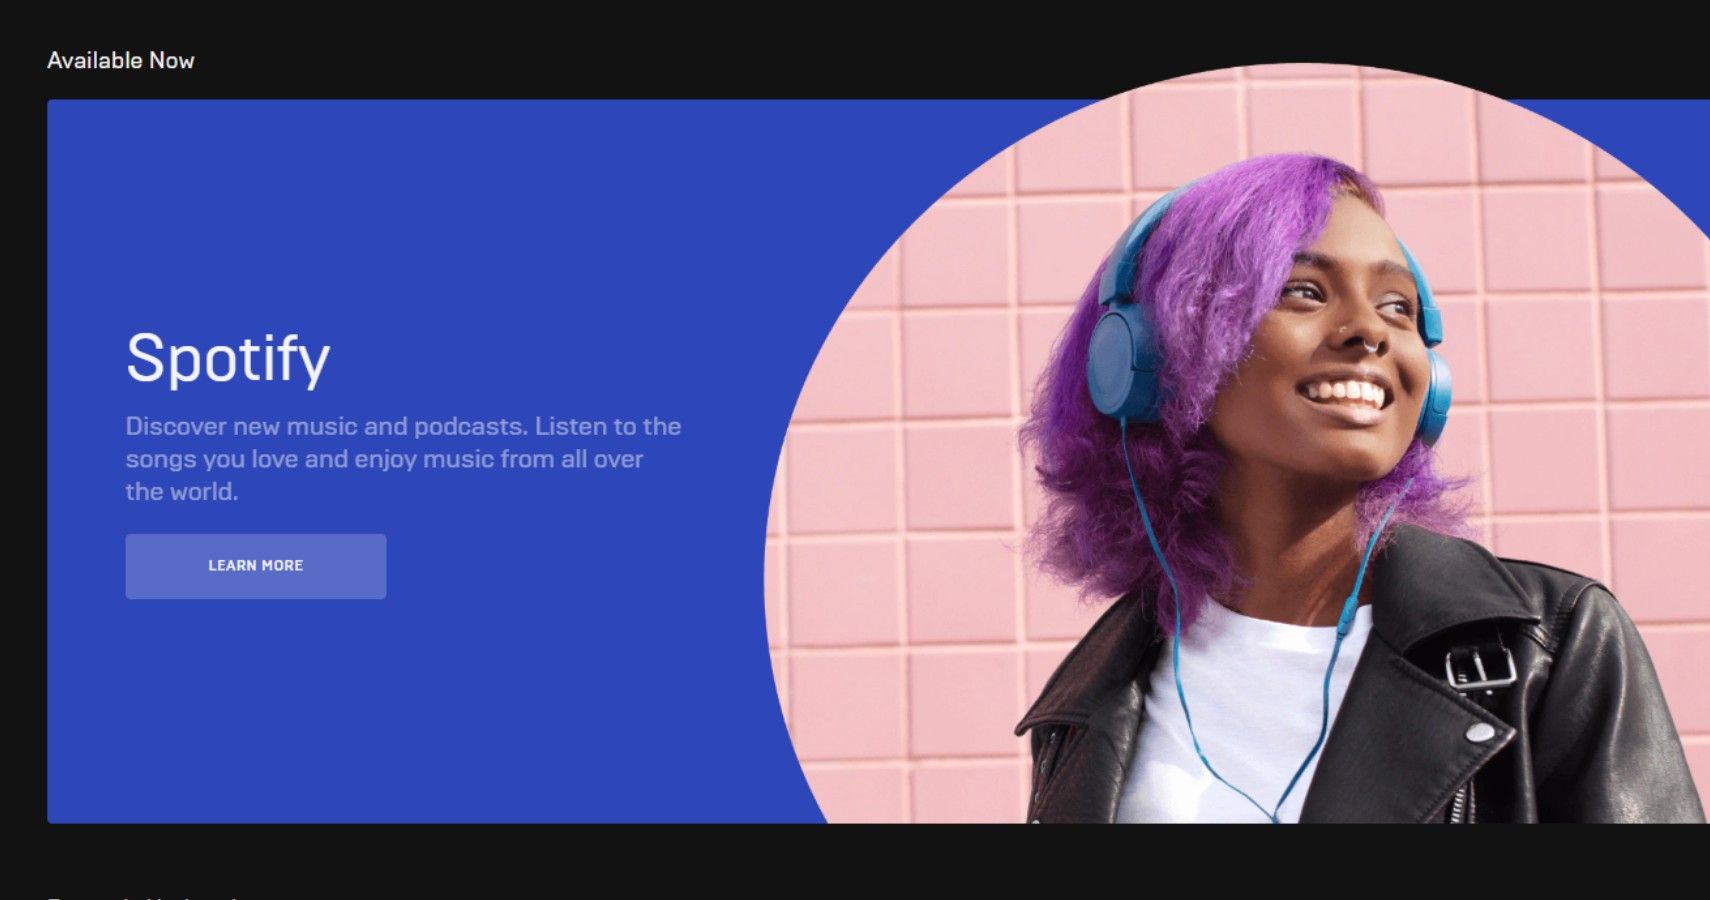 Spotify Is Now Available On The Epic Games Store, For Some Reason